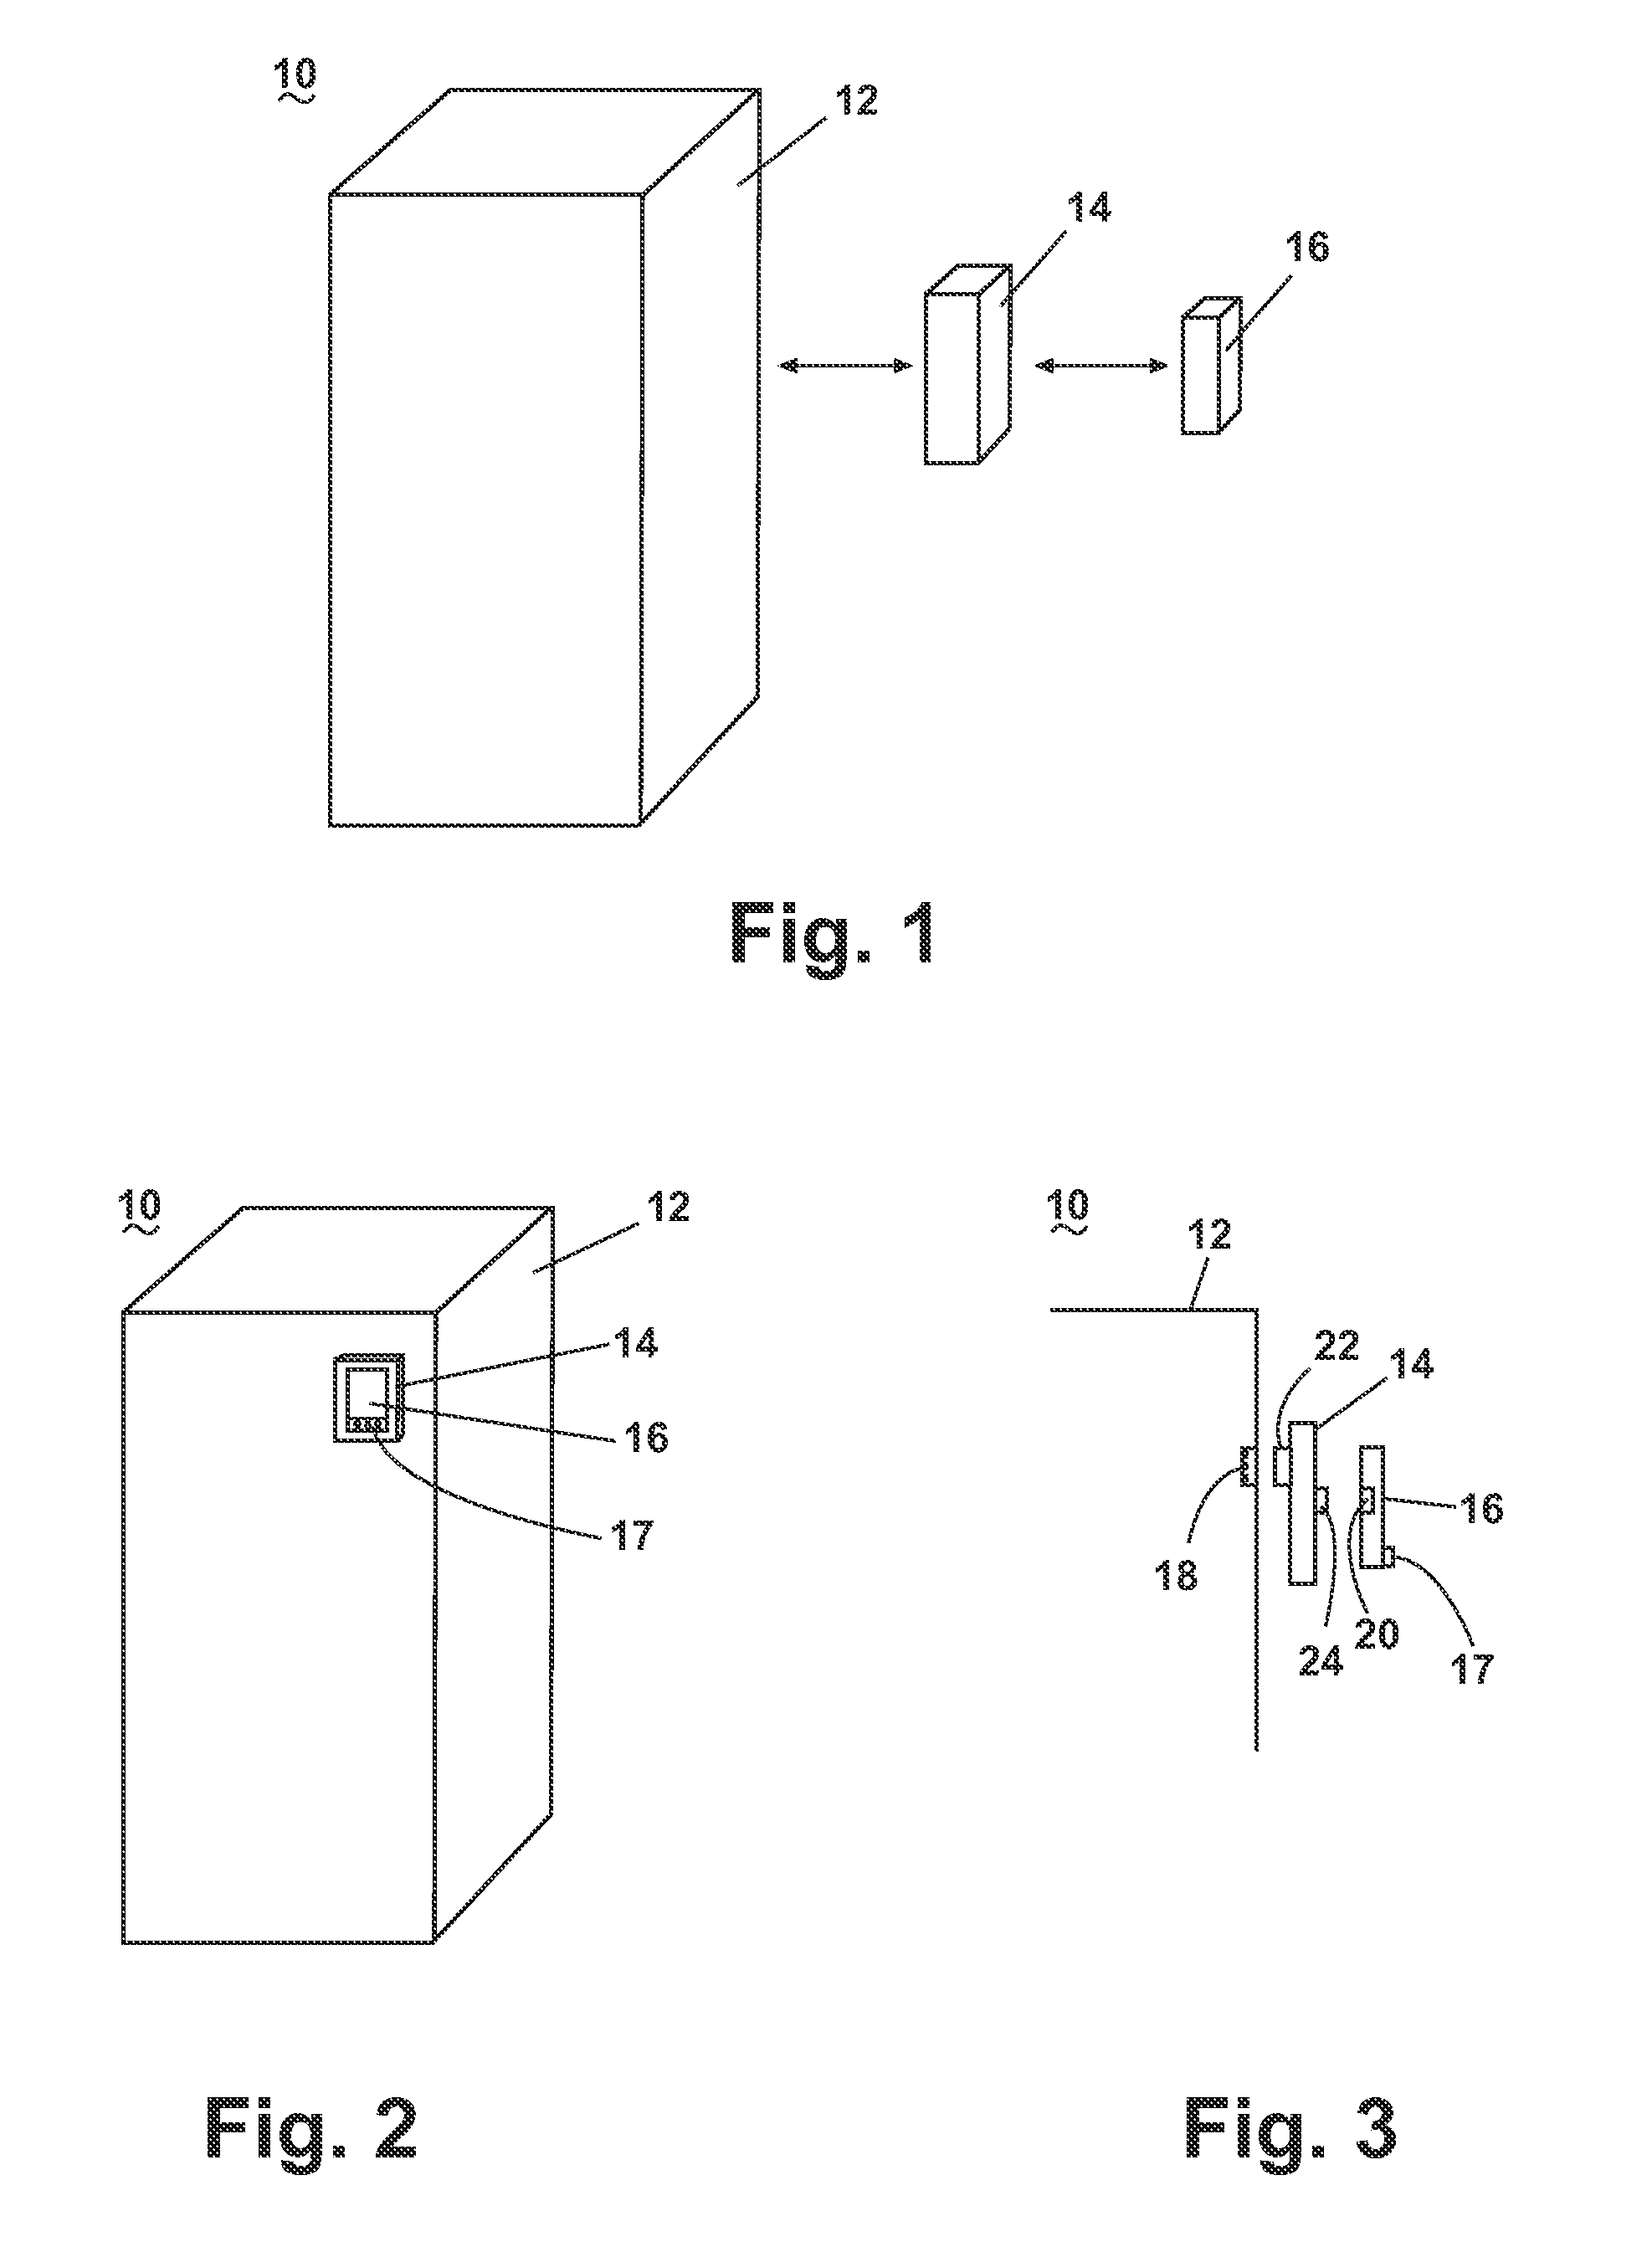 Host With Multiple Adapters for Coupling Consumer Electronic Devices